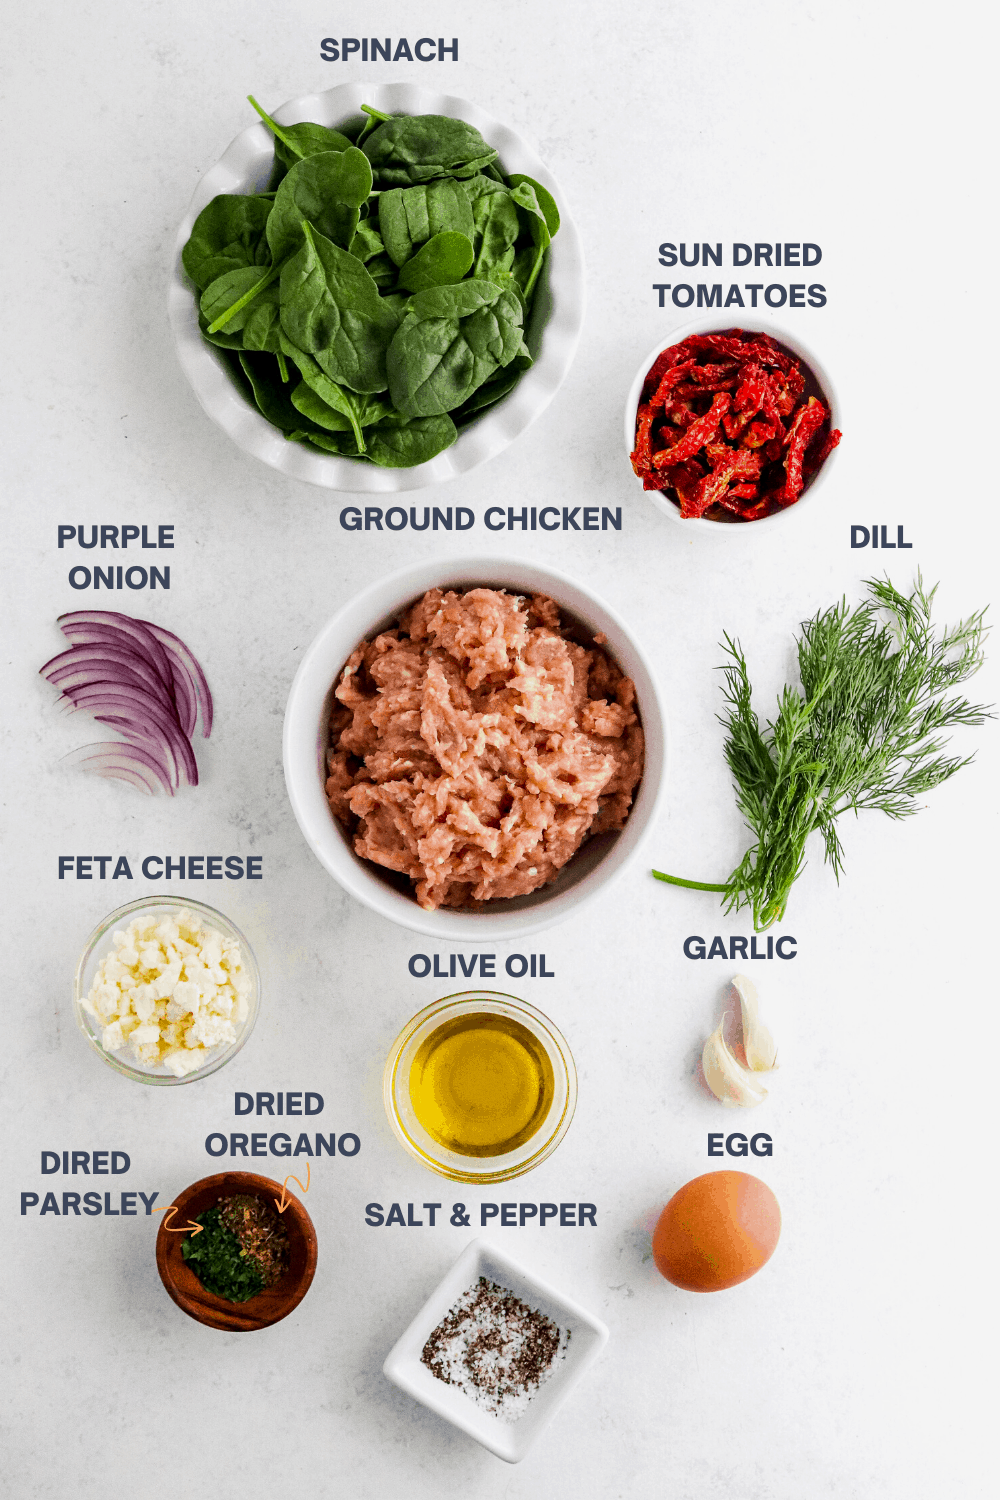 round white bowl of spinach leaves, bowl of sun dried tomatoes, sliced purple onion bowl of ground chicken, dill, bowl of feta cheese, bowl of olive ol, egg, garlic and bowl of salt and pepper on a white surface with labels over each ingredient. 